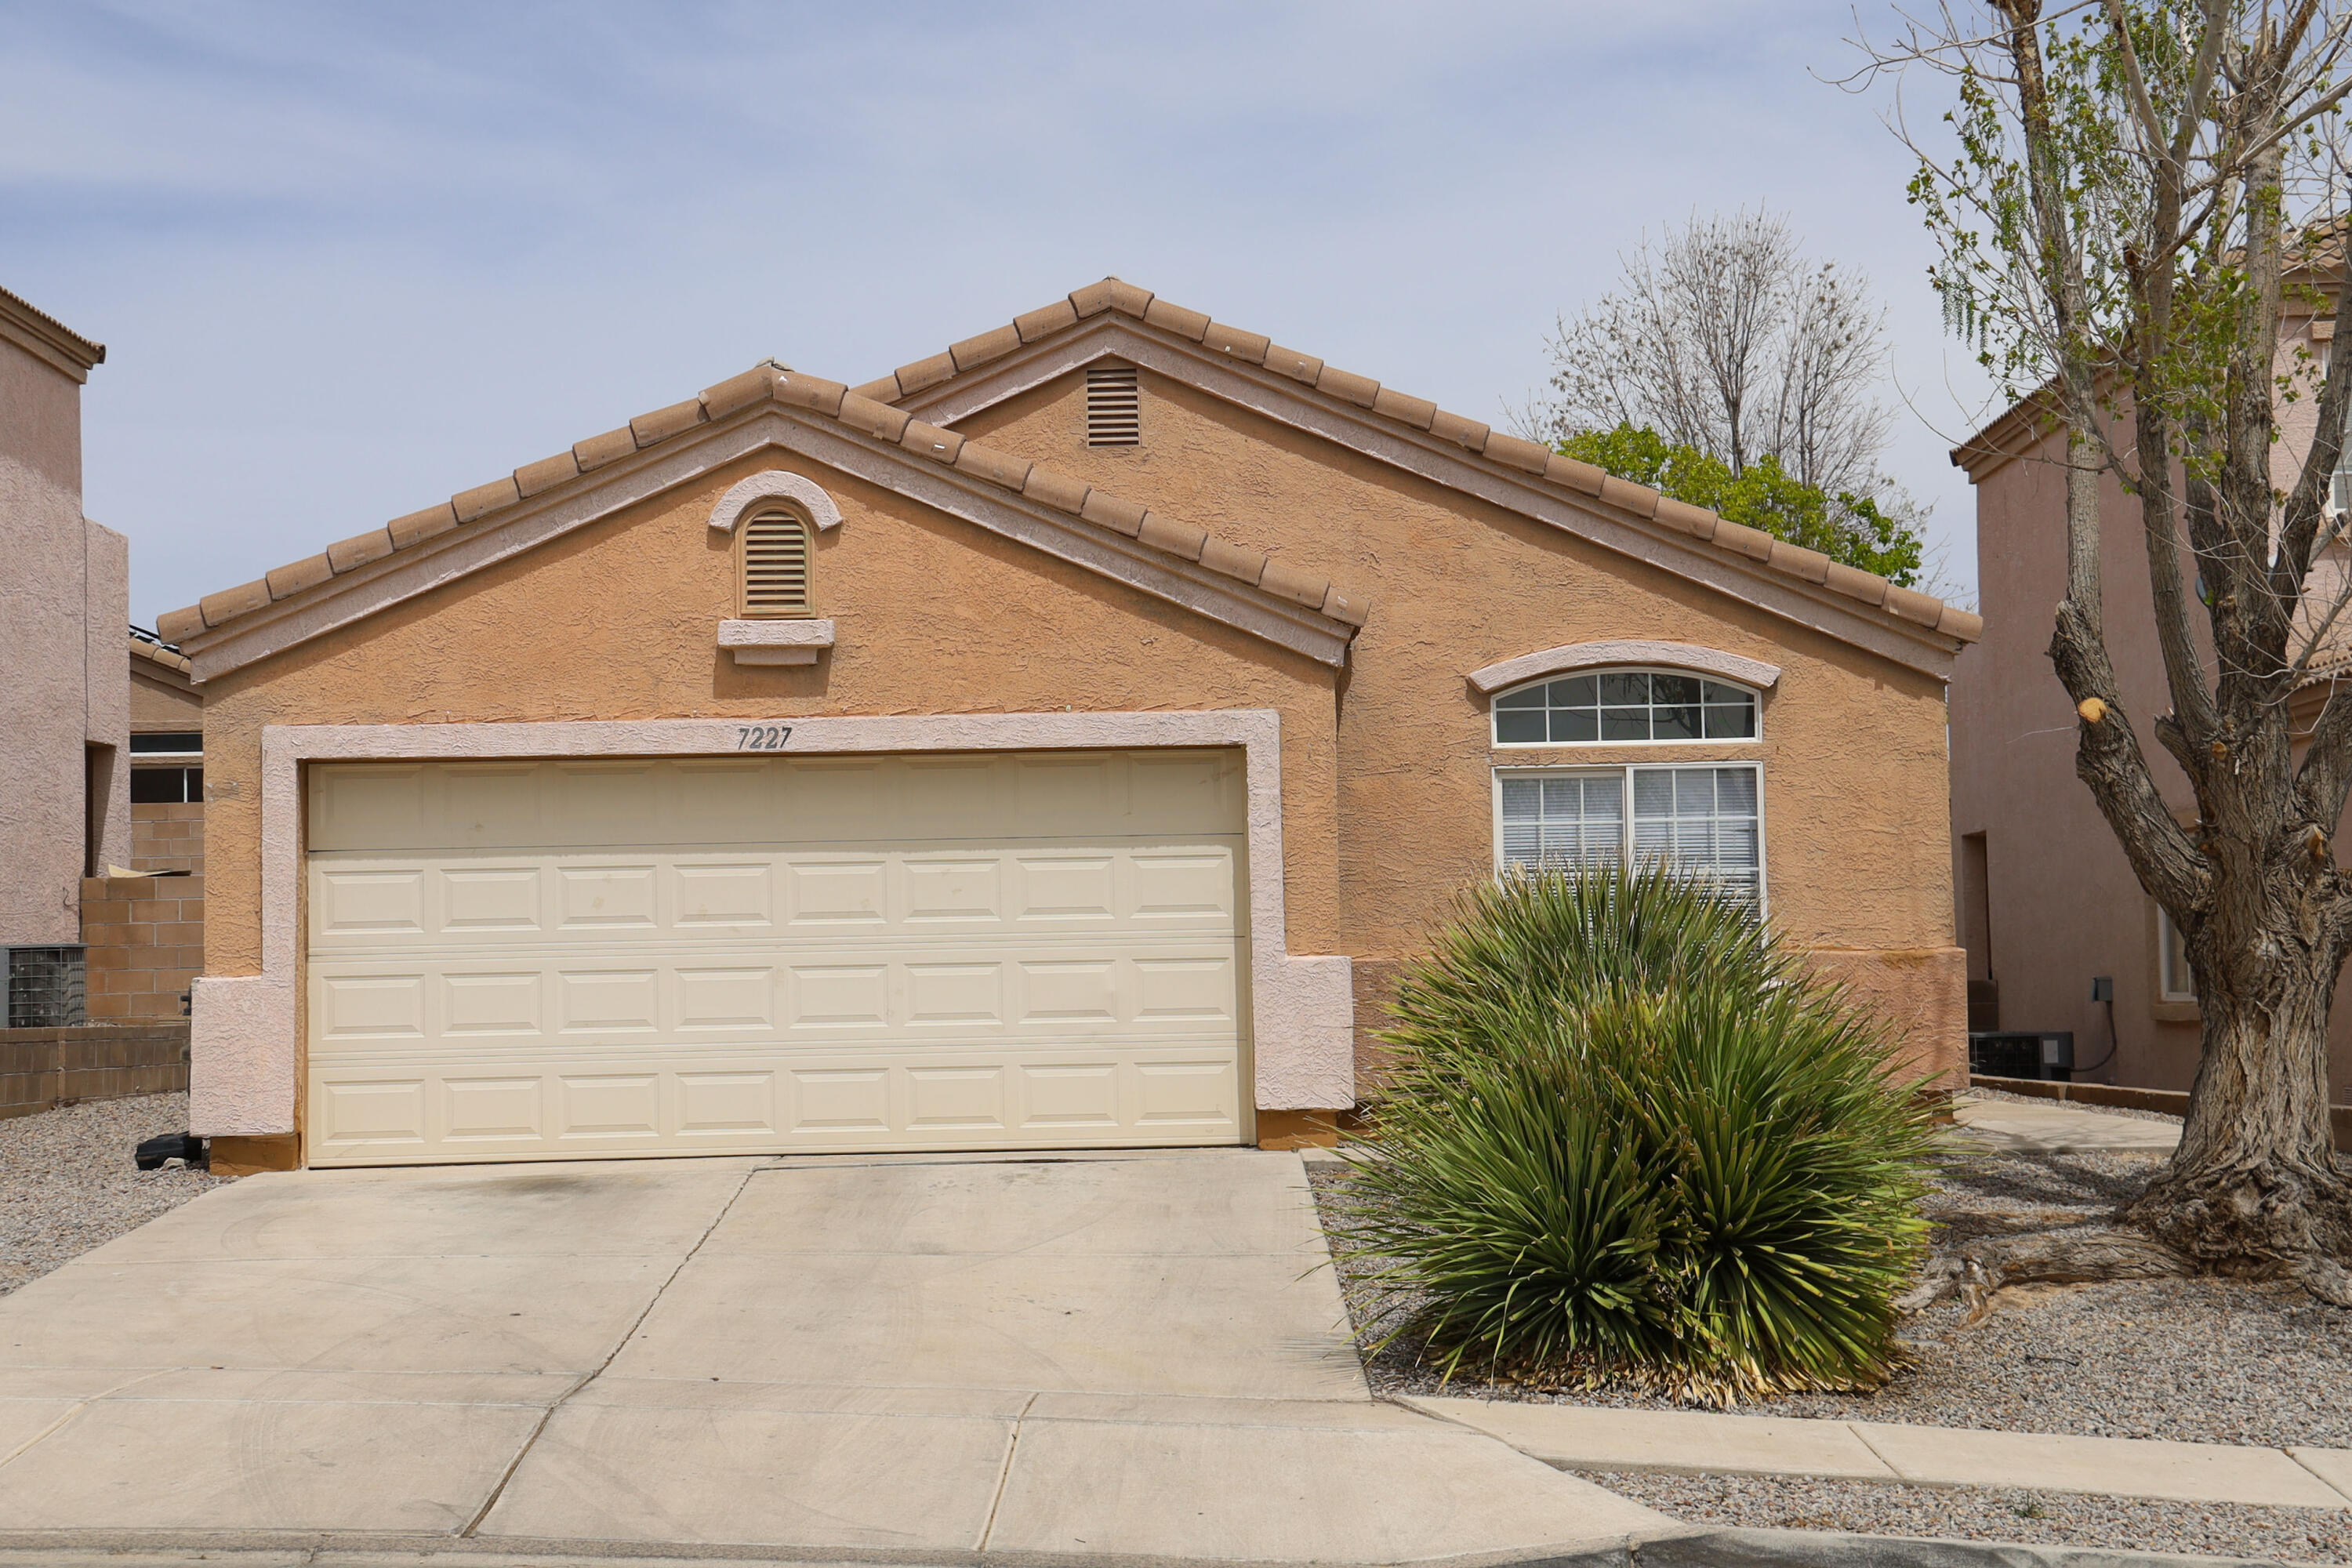 Move in condition 4BR in prestigeous Ventana Ranch.  Convenient to Paseo Del Norte, shopping schools and more! Open floor with huge great room that flows into the kitchen/dining area.  Well appointed master bedroom. Beautiful neighborhood, and great location!